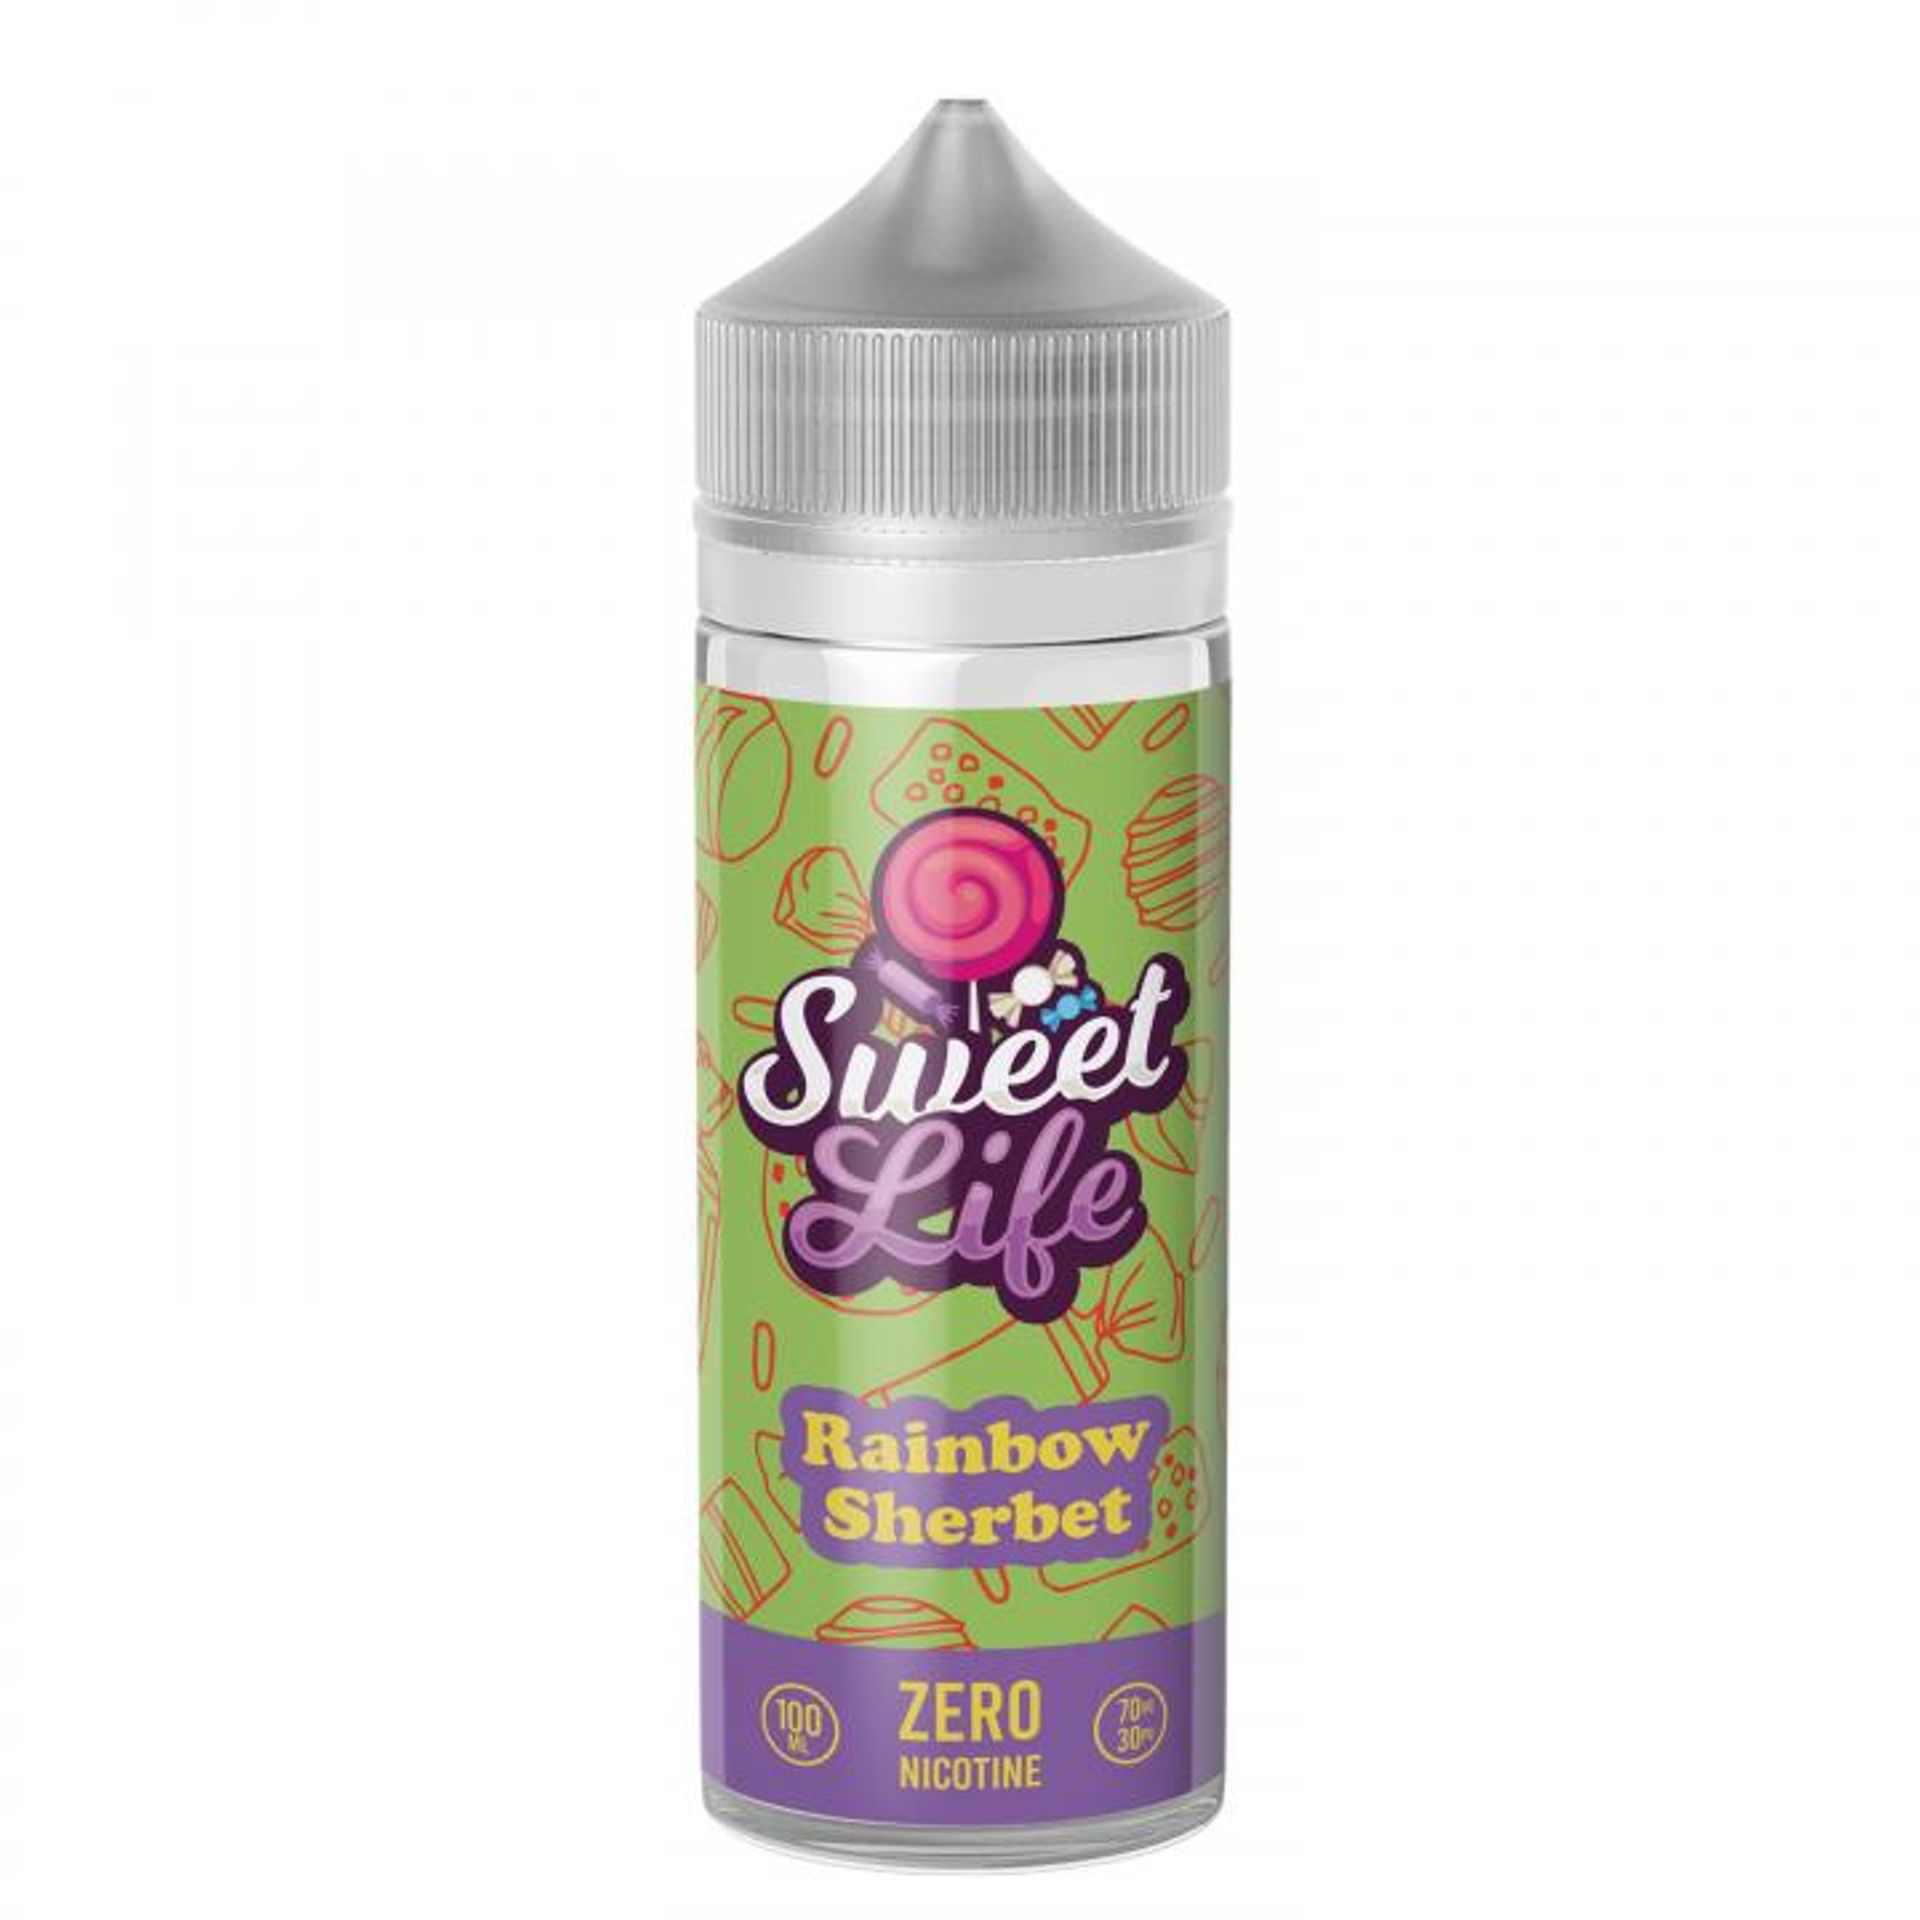 Image of Rainbow Sherbet by Sweet Life